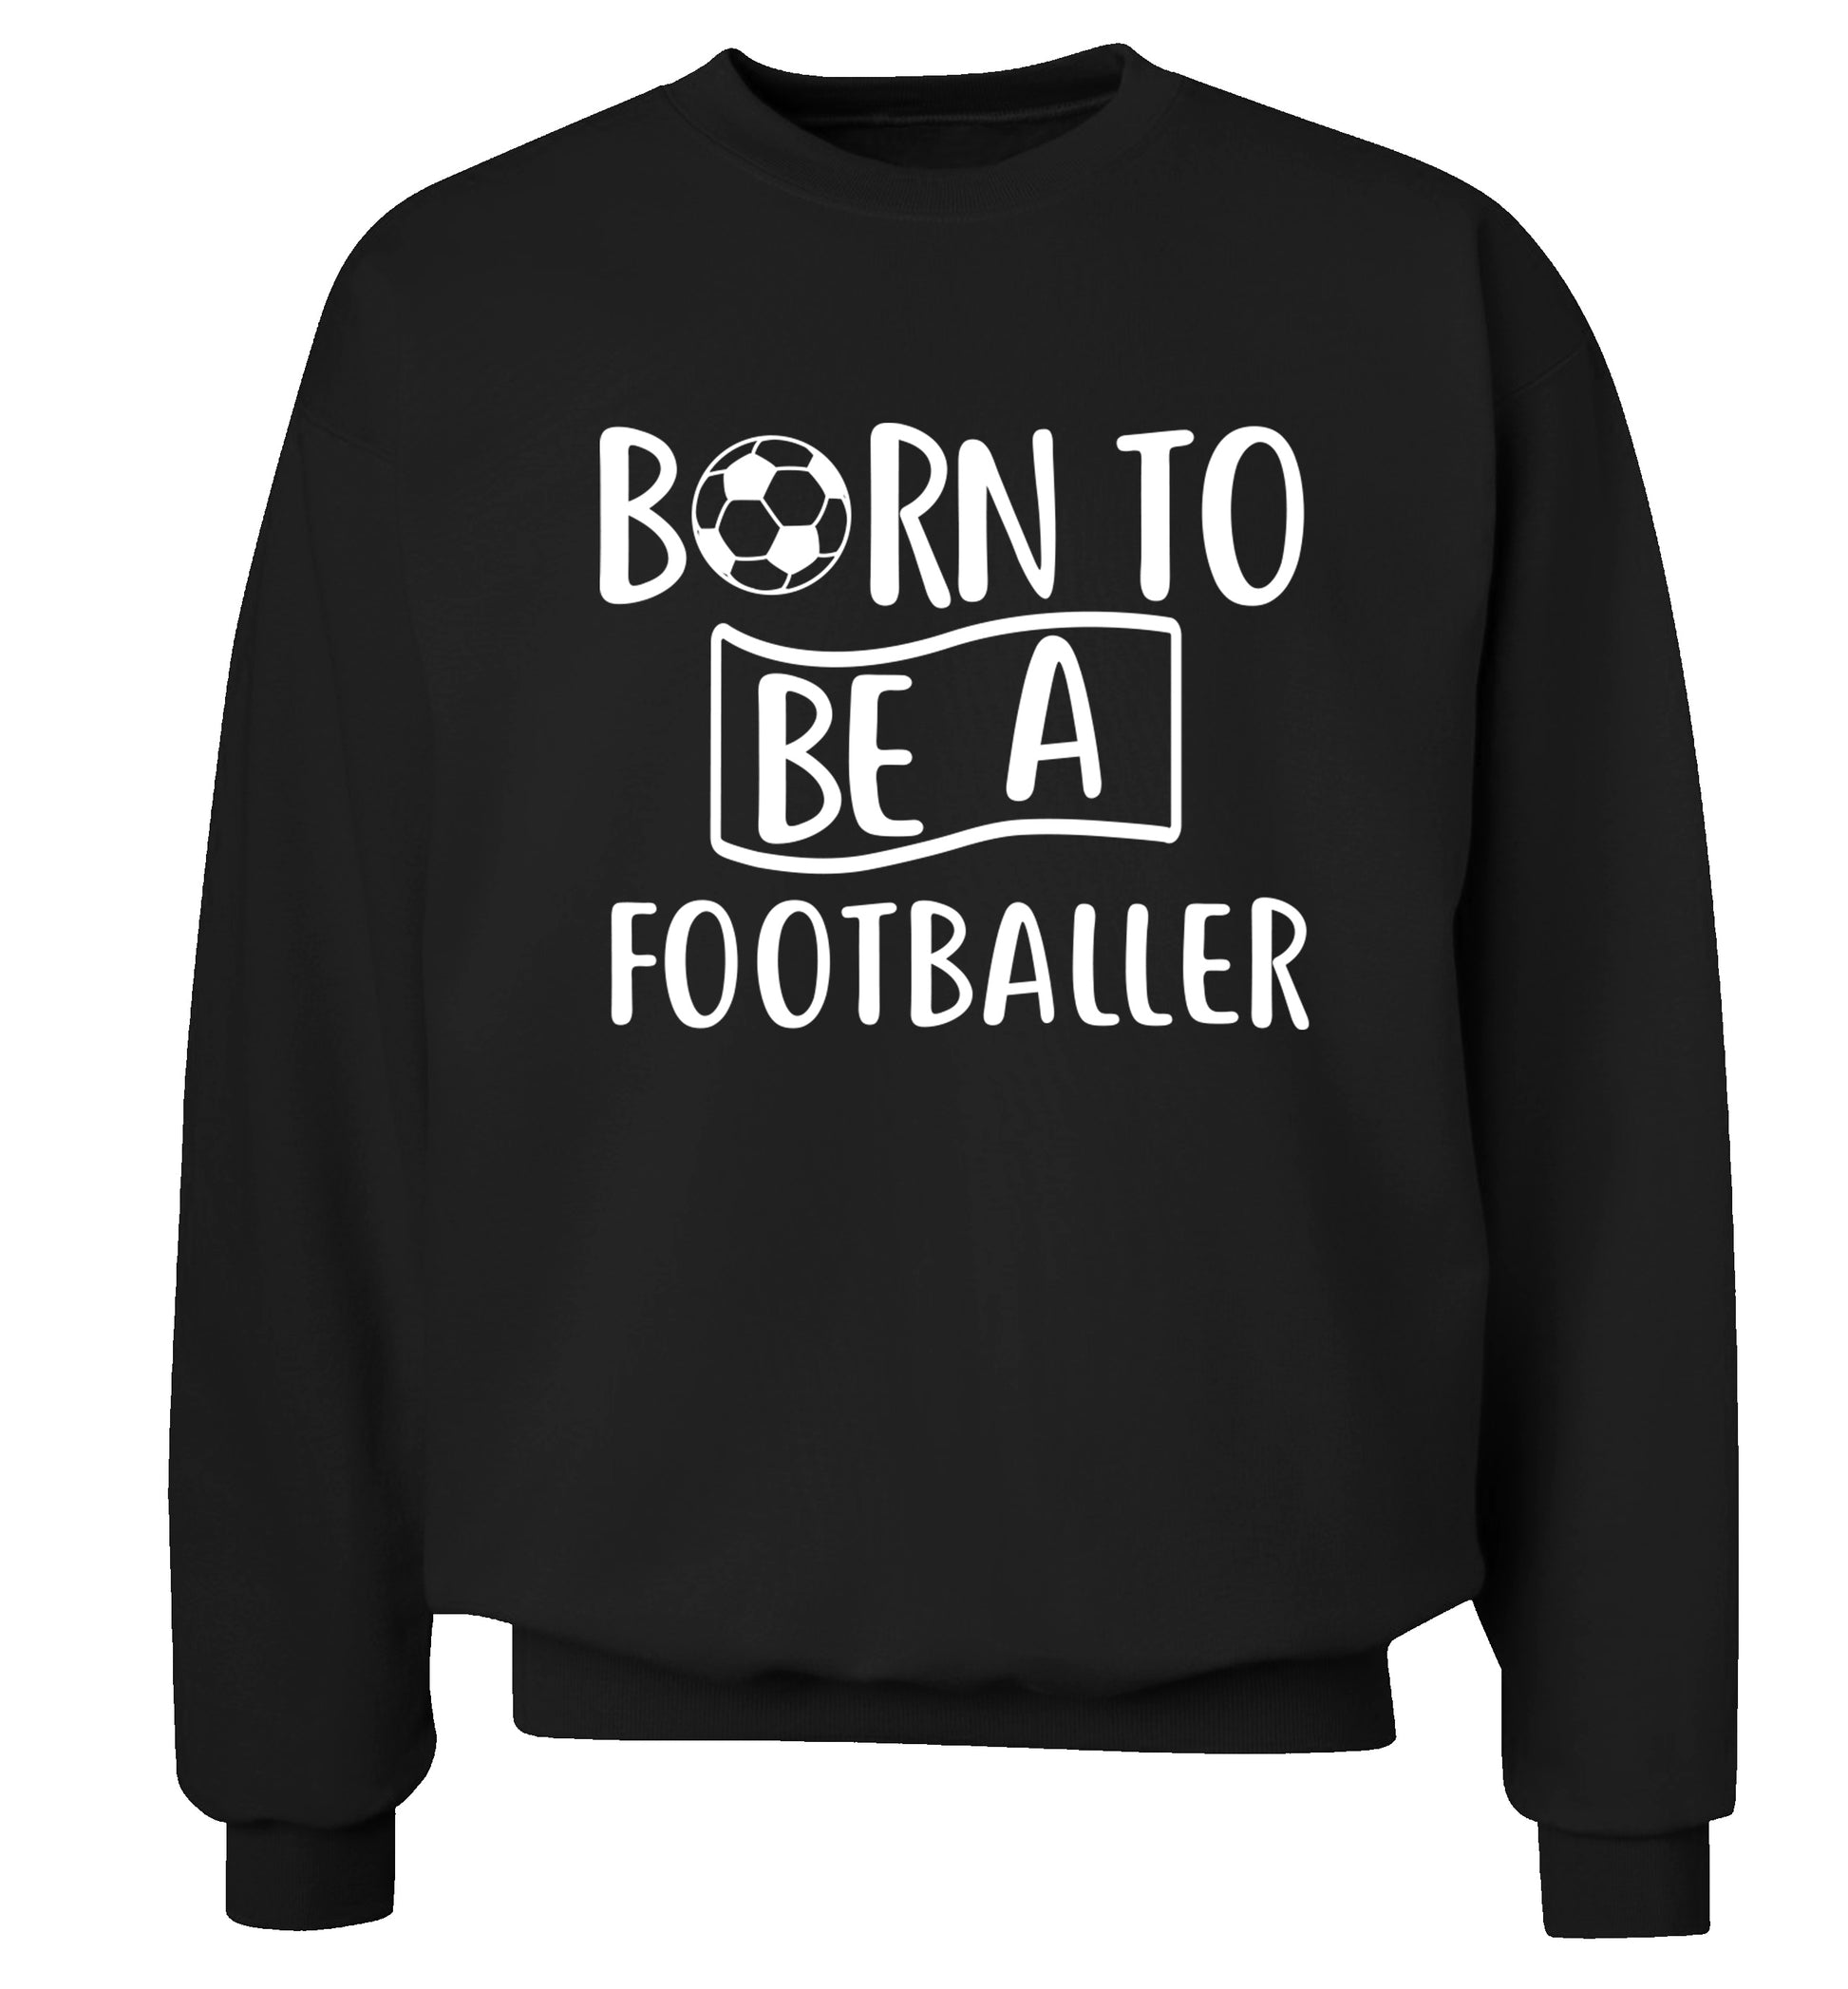 Born to be a footballer Adult's unisexblack Sweater 2XL